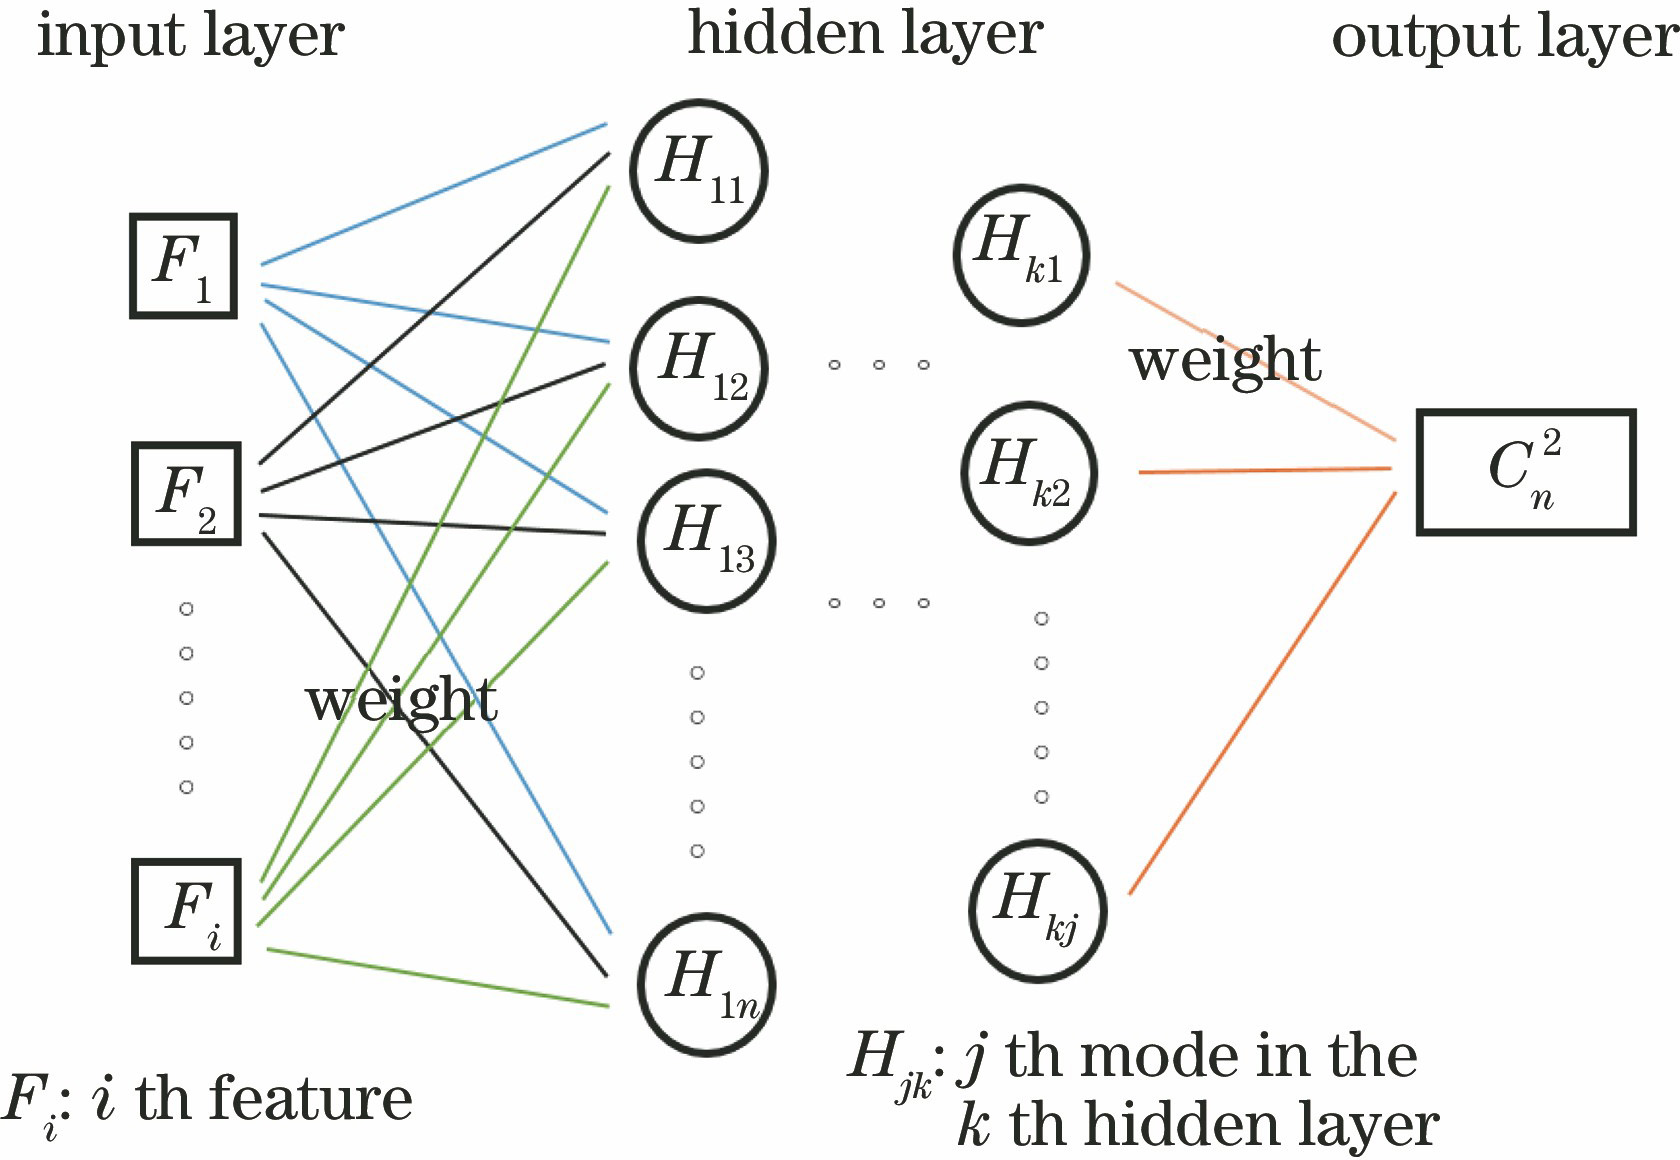 MLP neural network structure